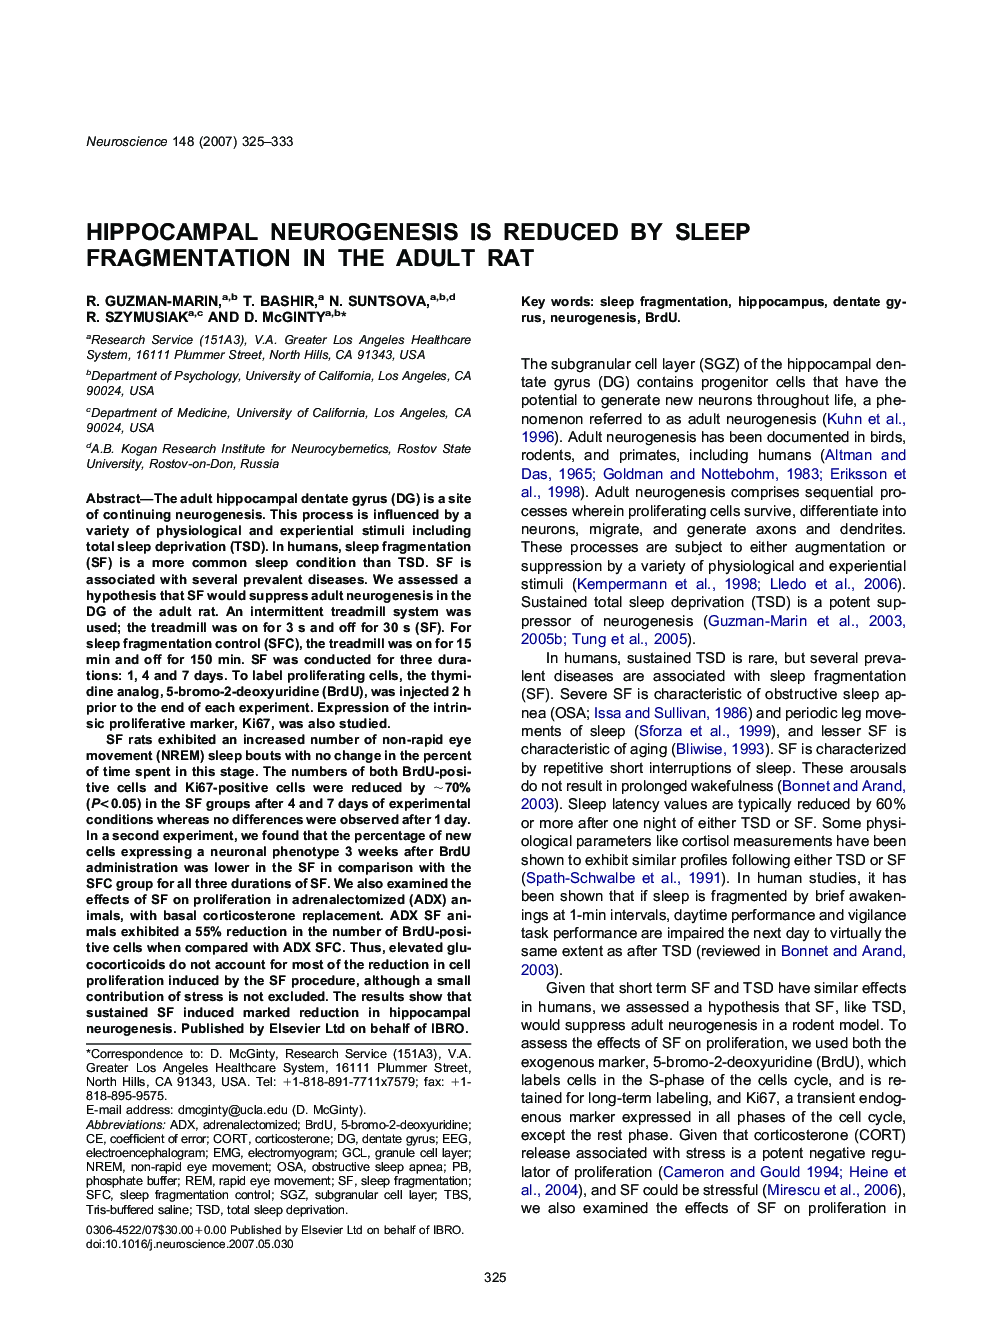 Hippocampal neurogenesis is reduced by sleep fragmentation in the adult rat